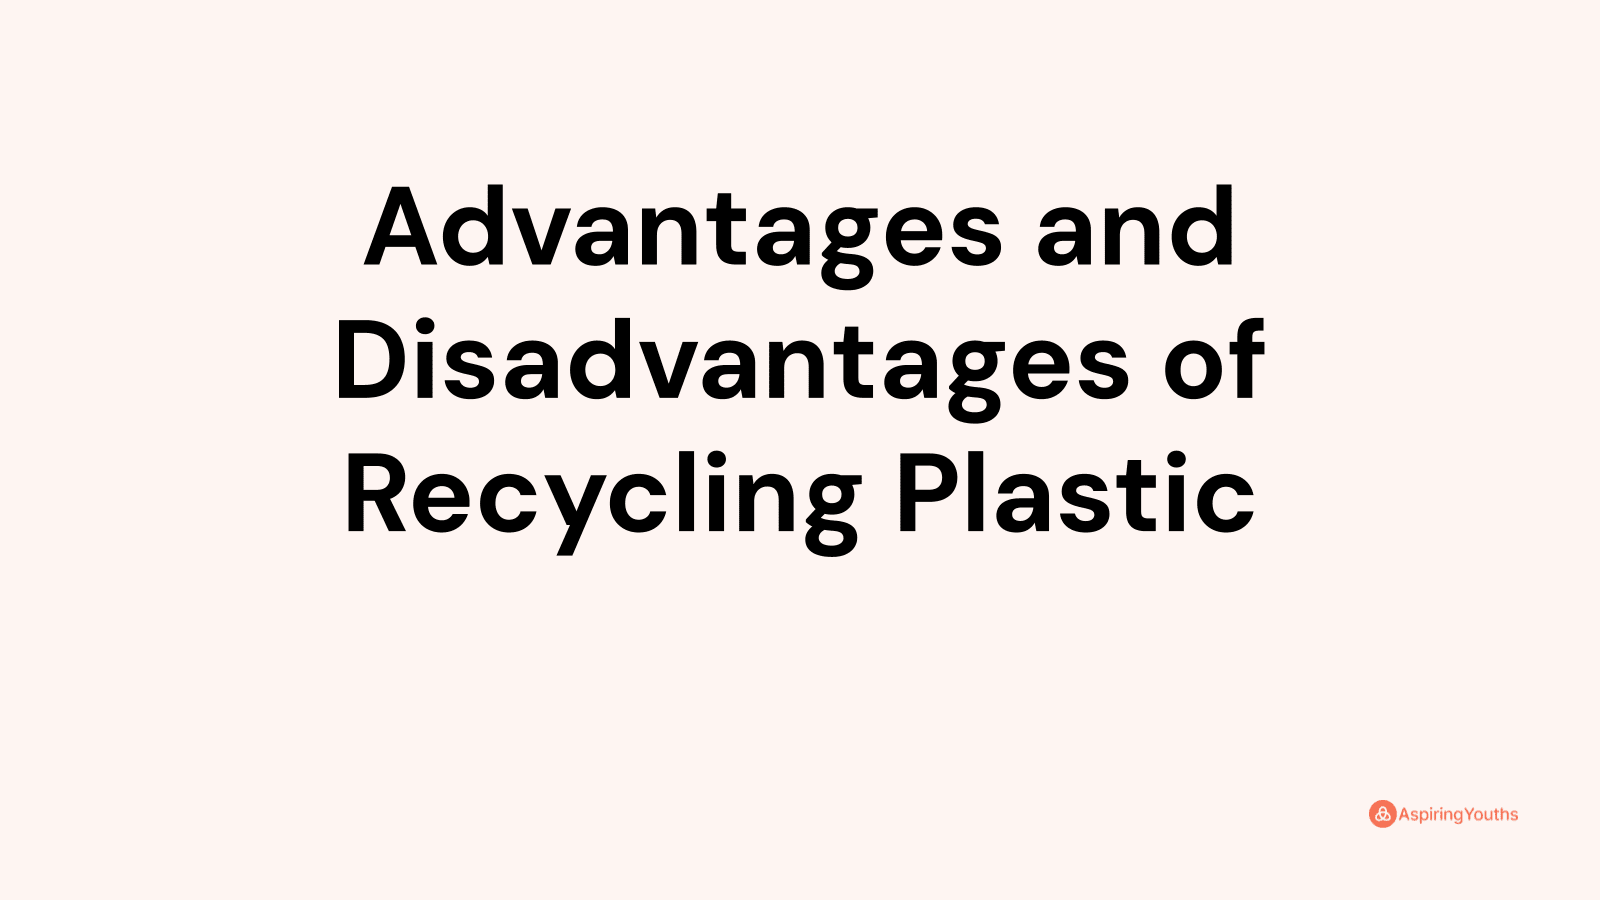 Advantages and disadvantages of Recycling Plastic